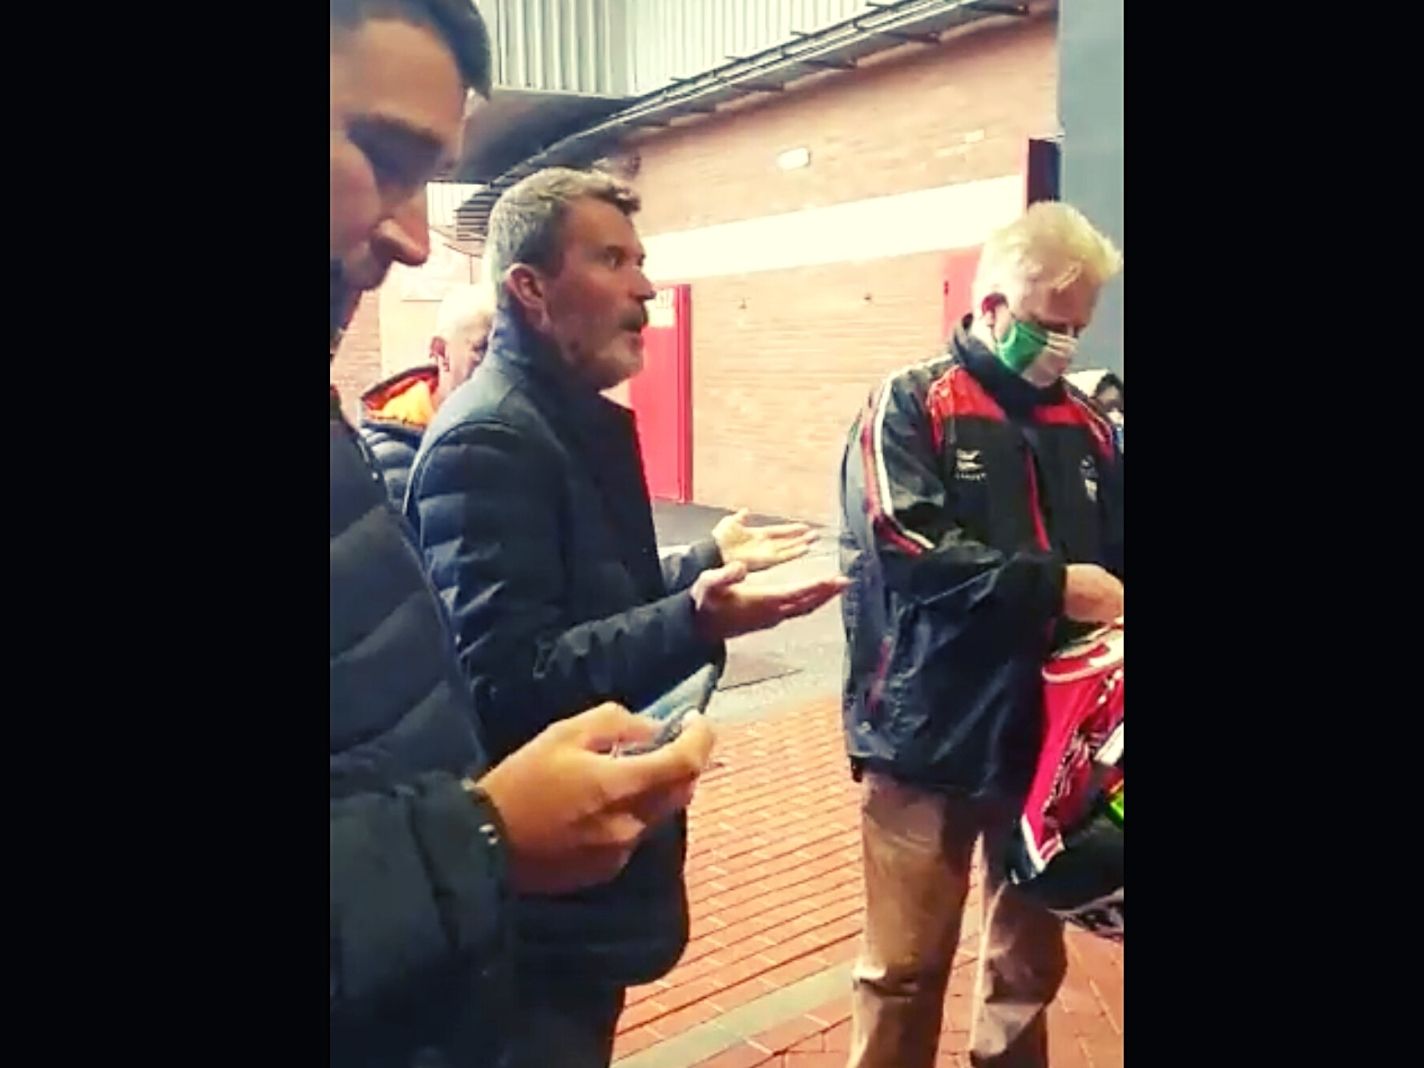 Watch: Roy Keane turns the table on drunk Manchester United fan outside Old Trafford